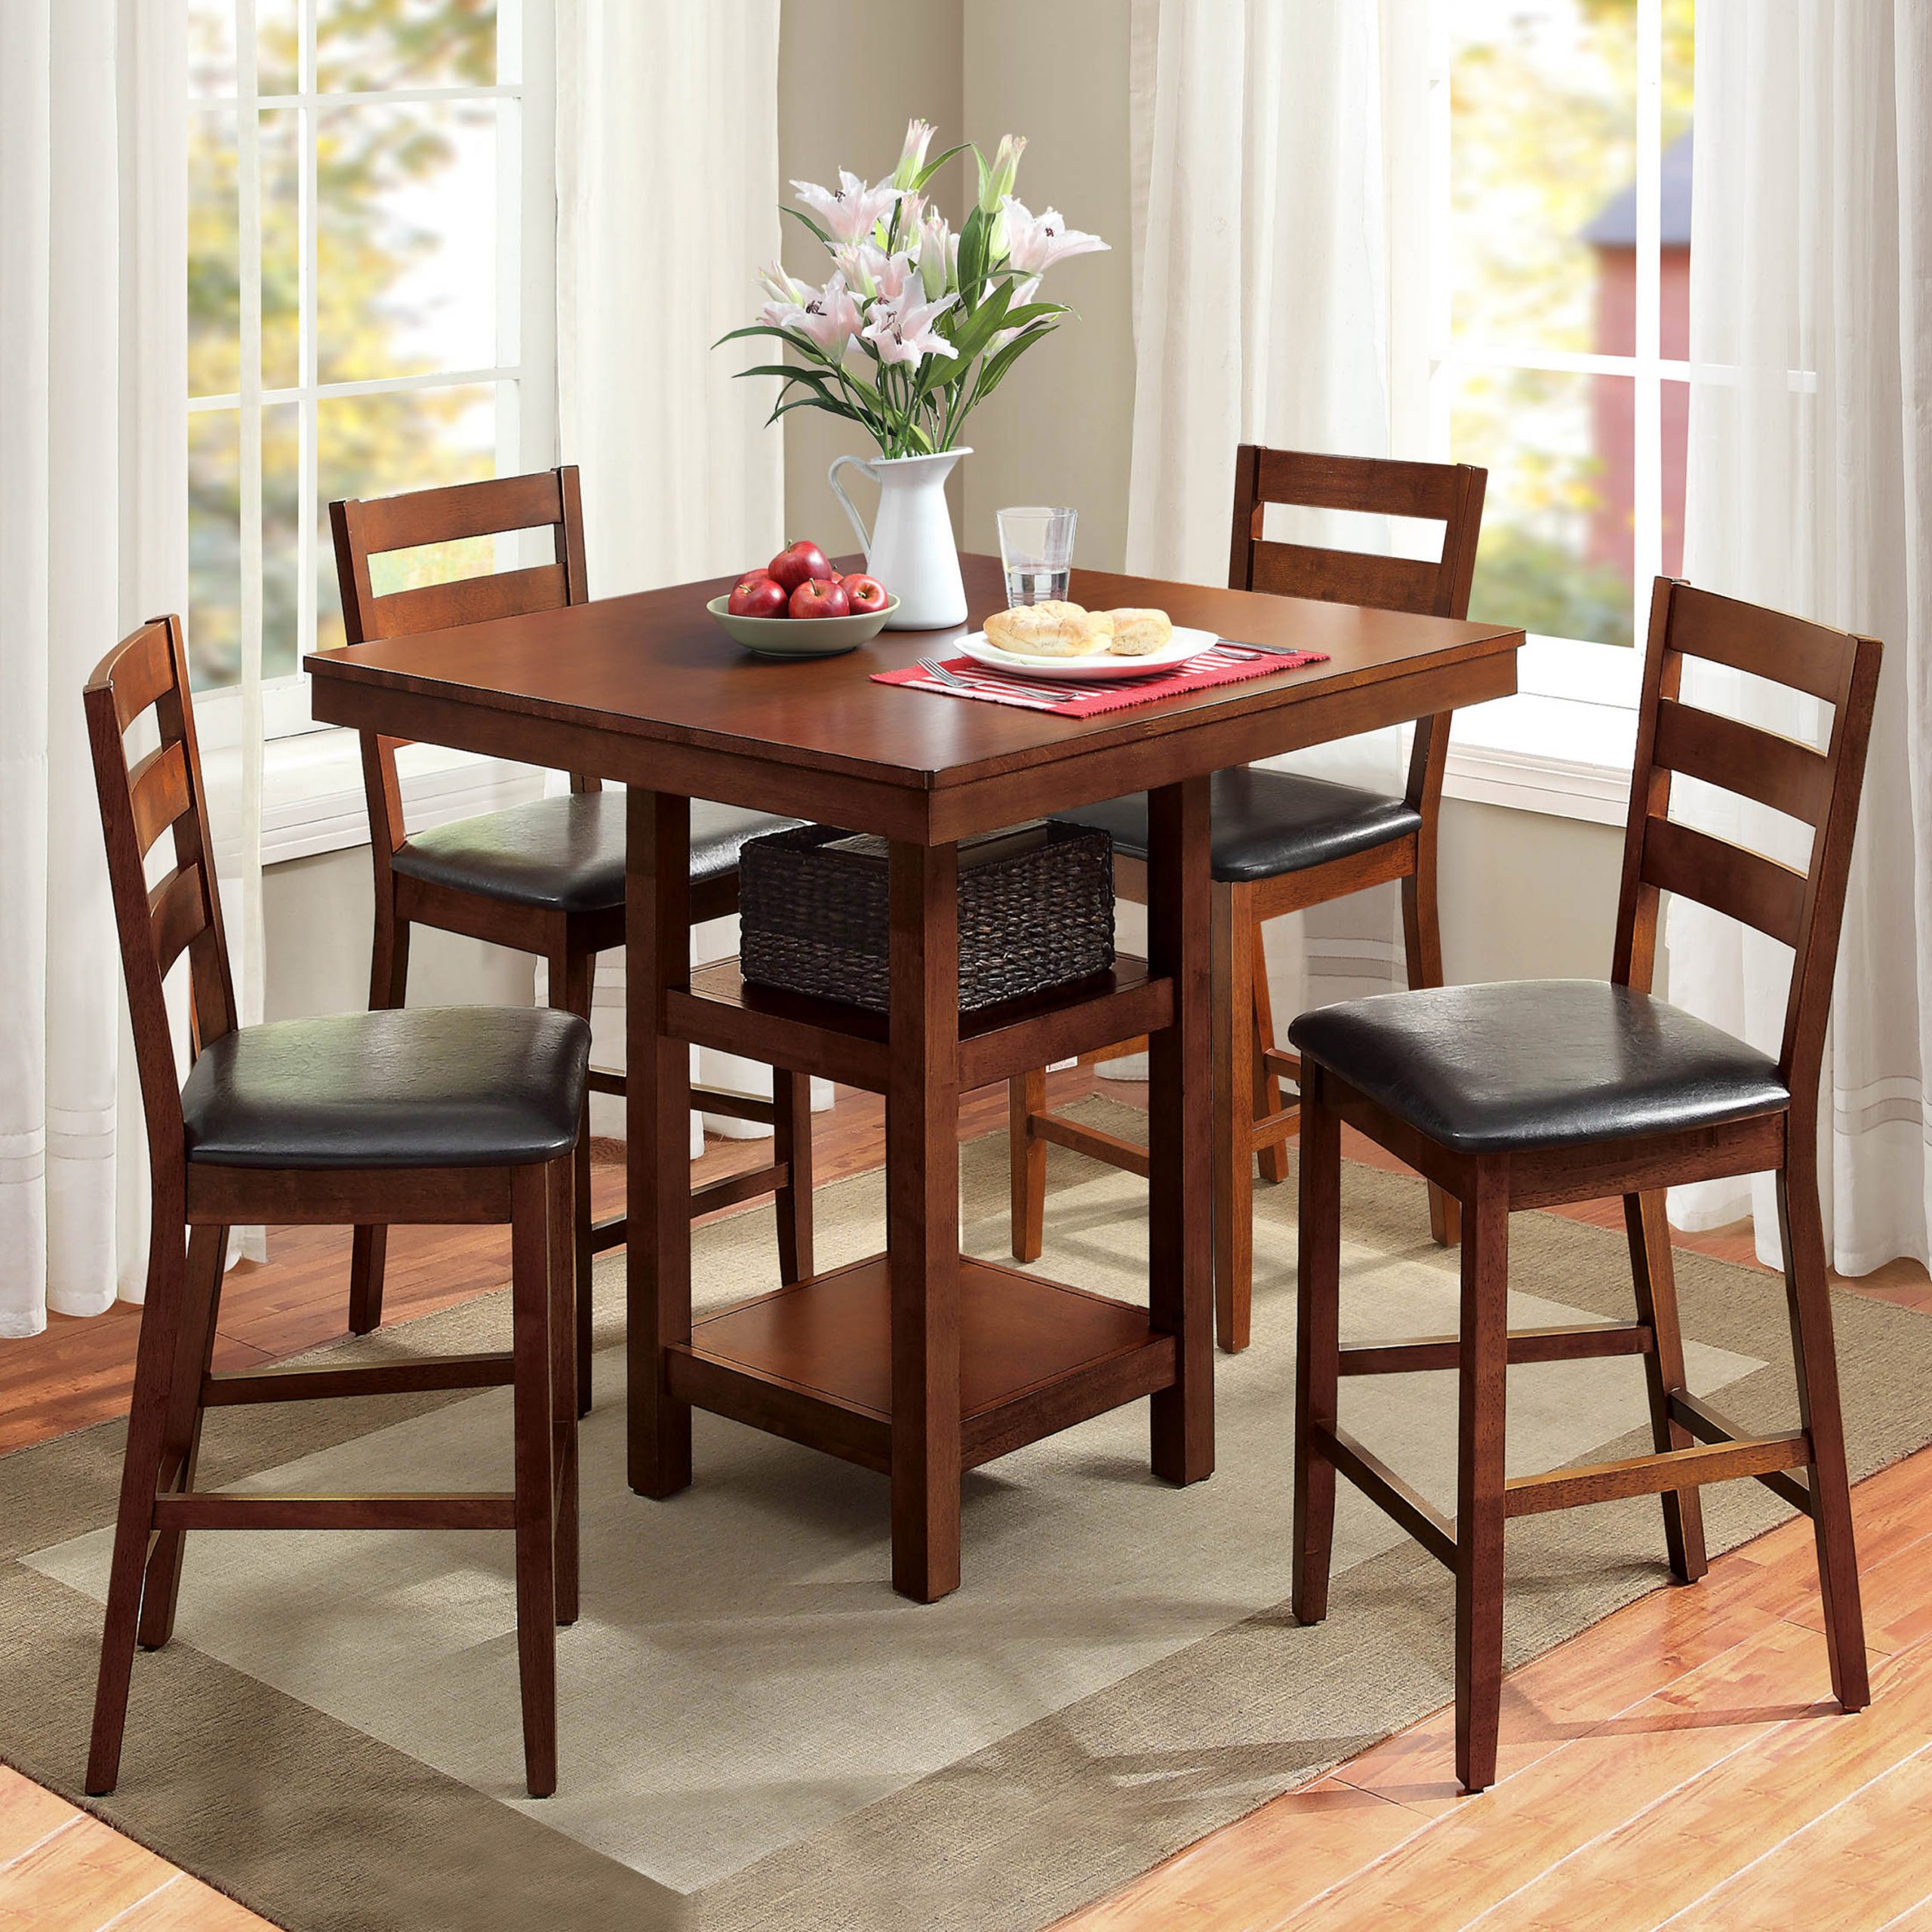 Whalen, Whalen Dining Room Chairs